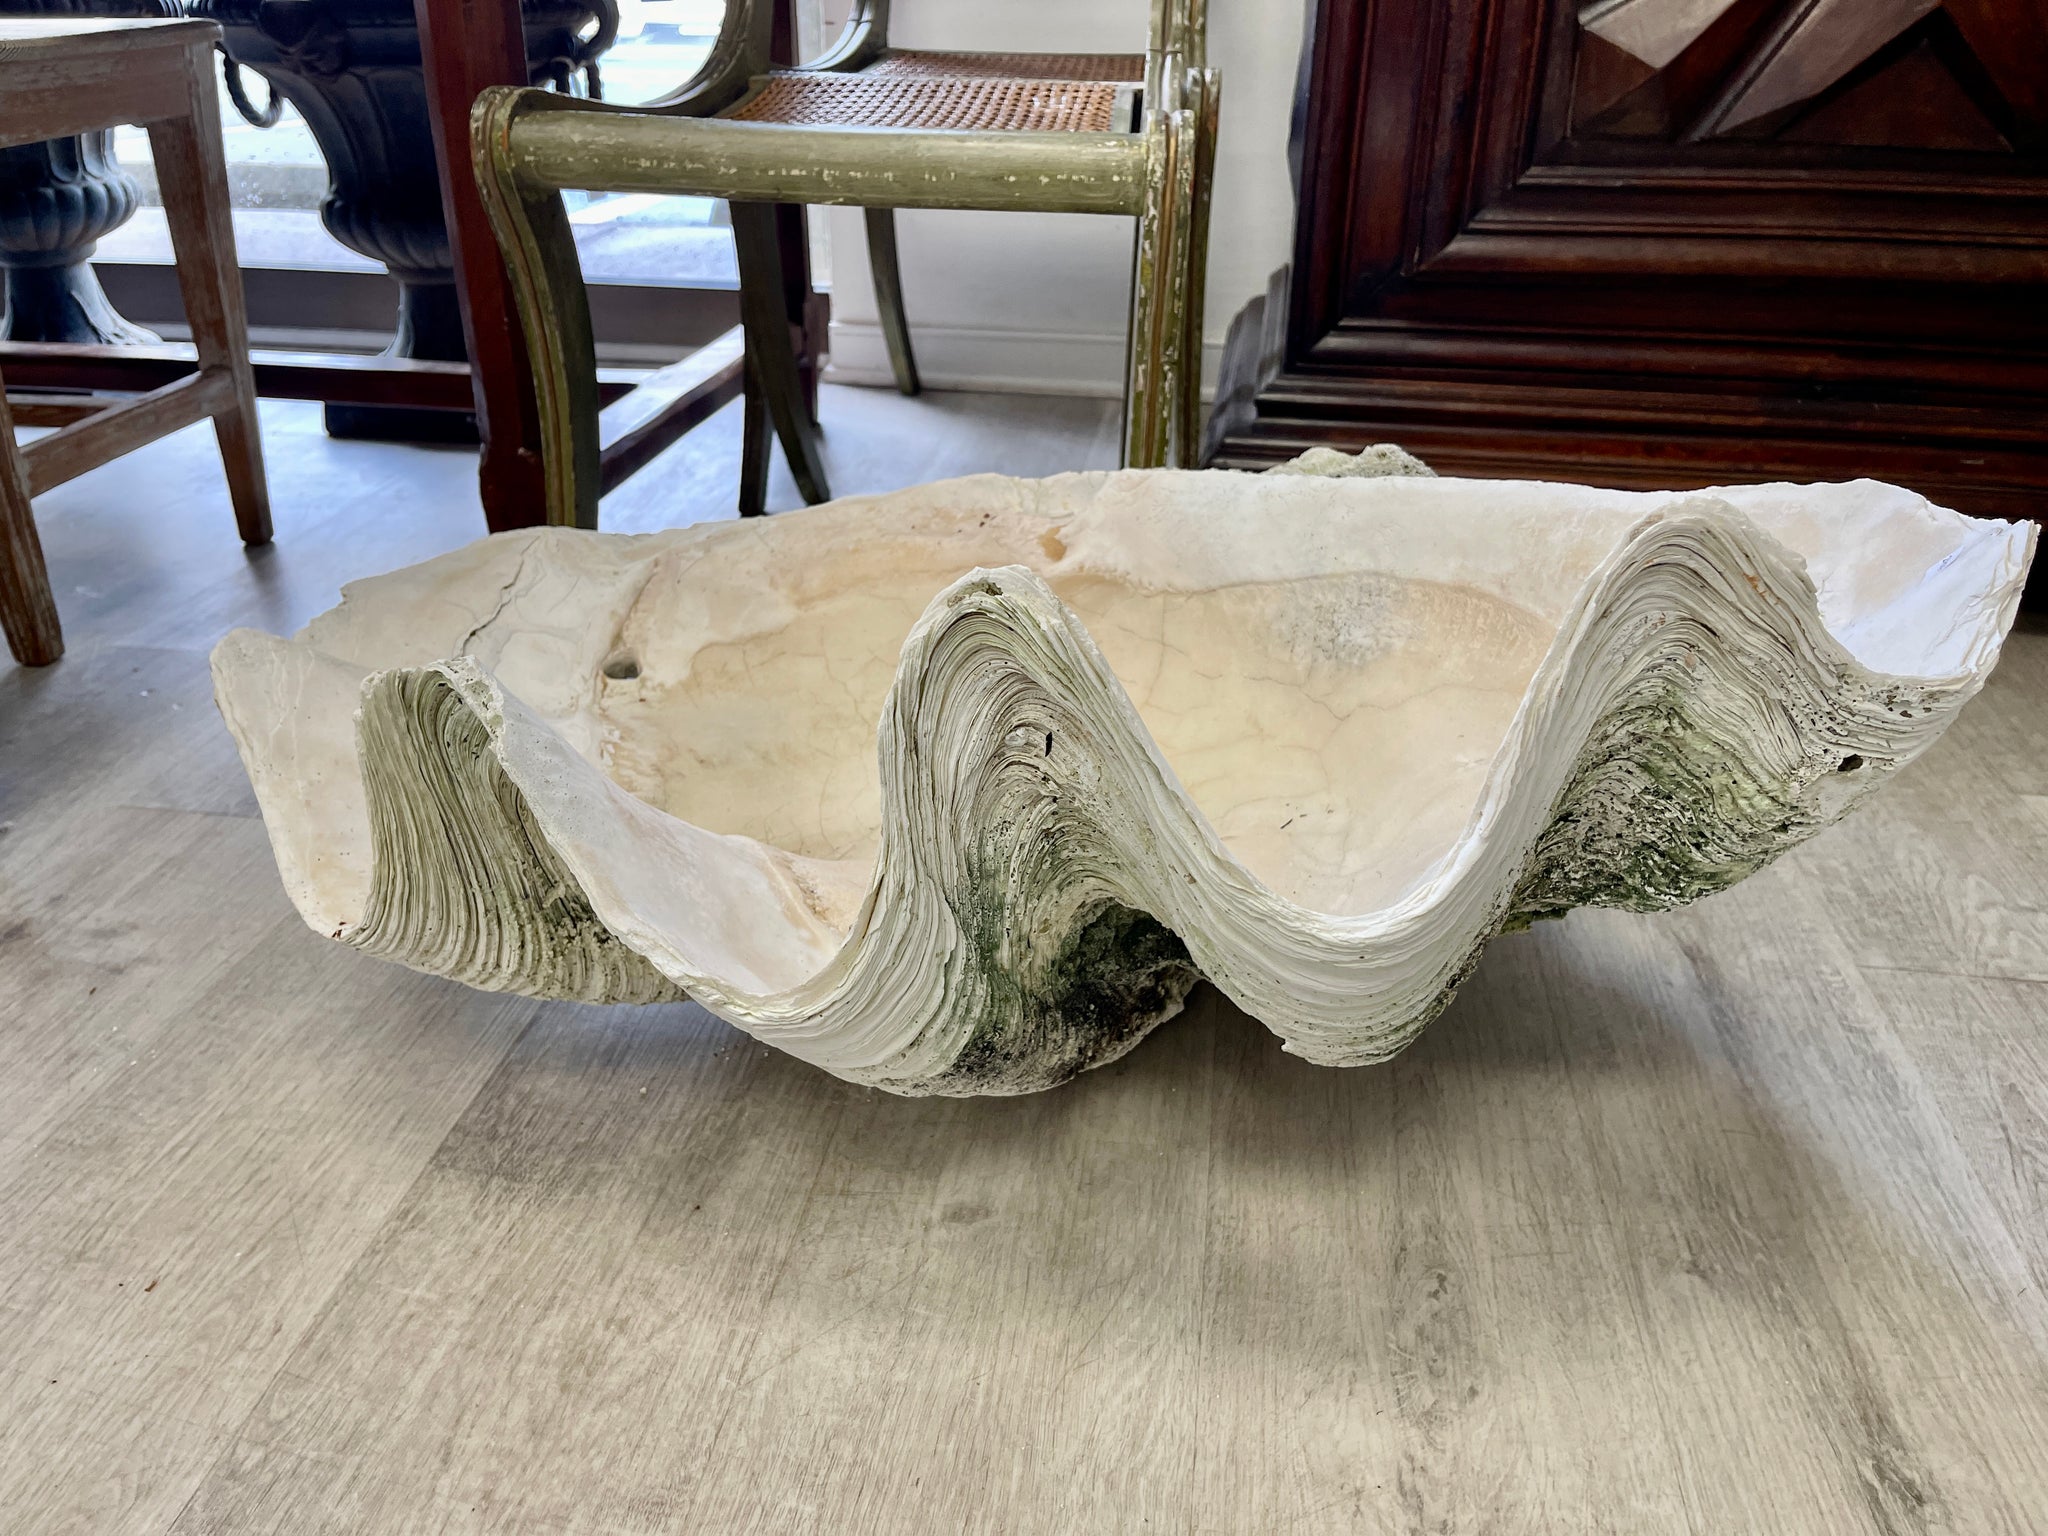 Antique 19th Century Giant Clam Shell - UK Architectural Heritage